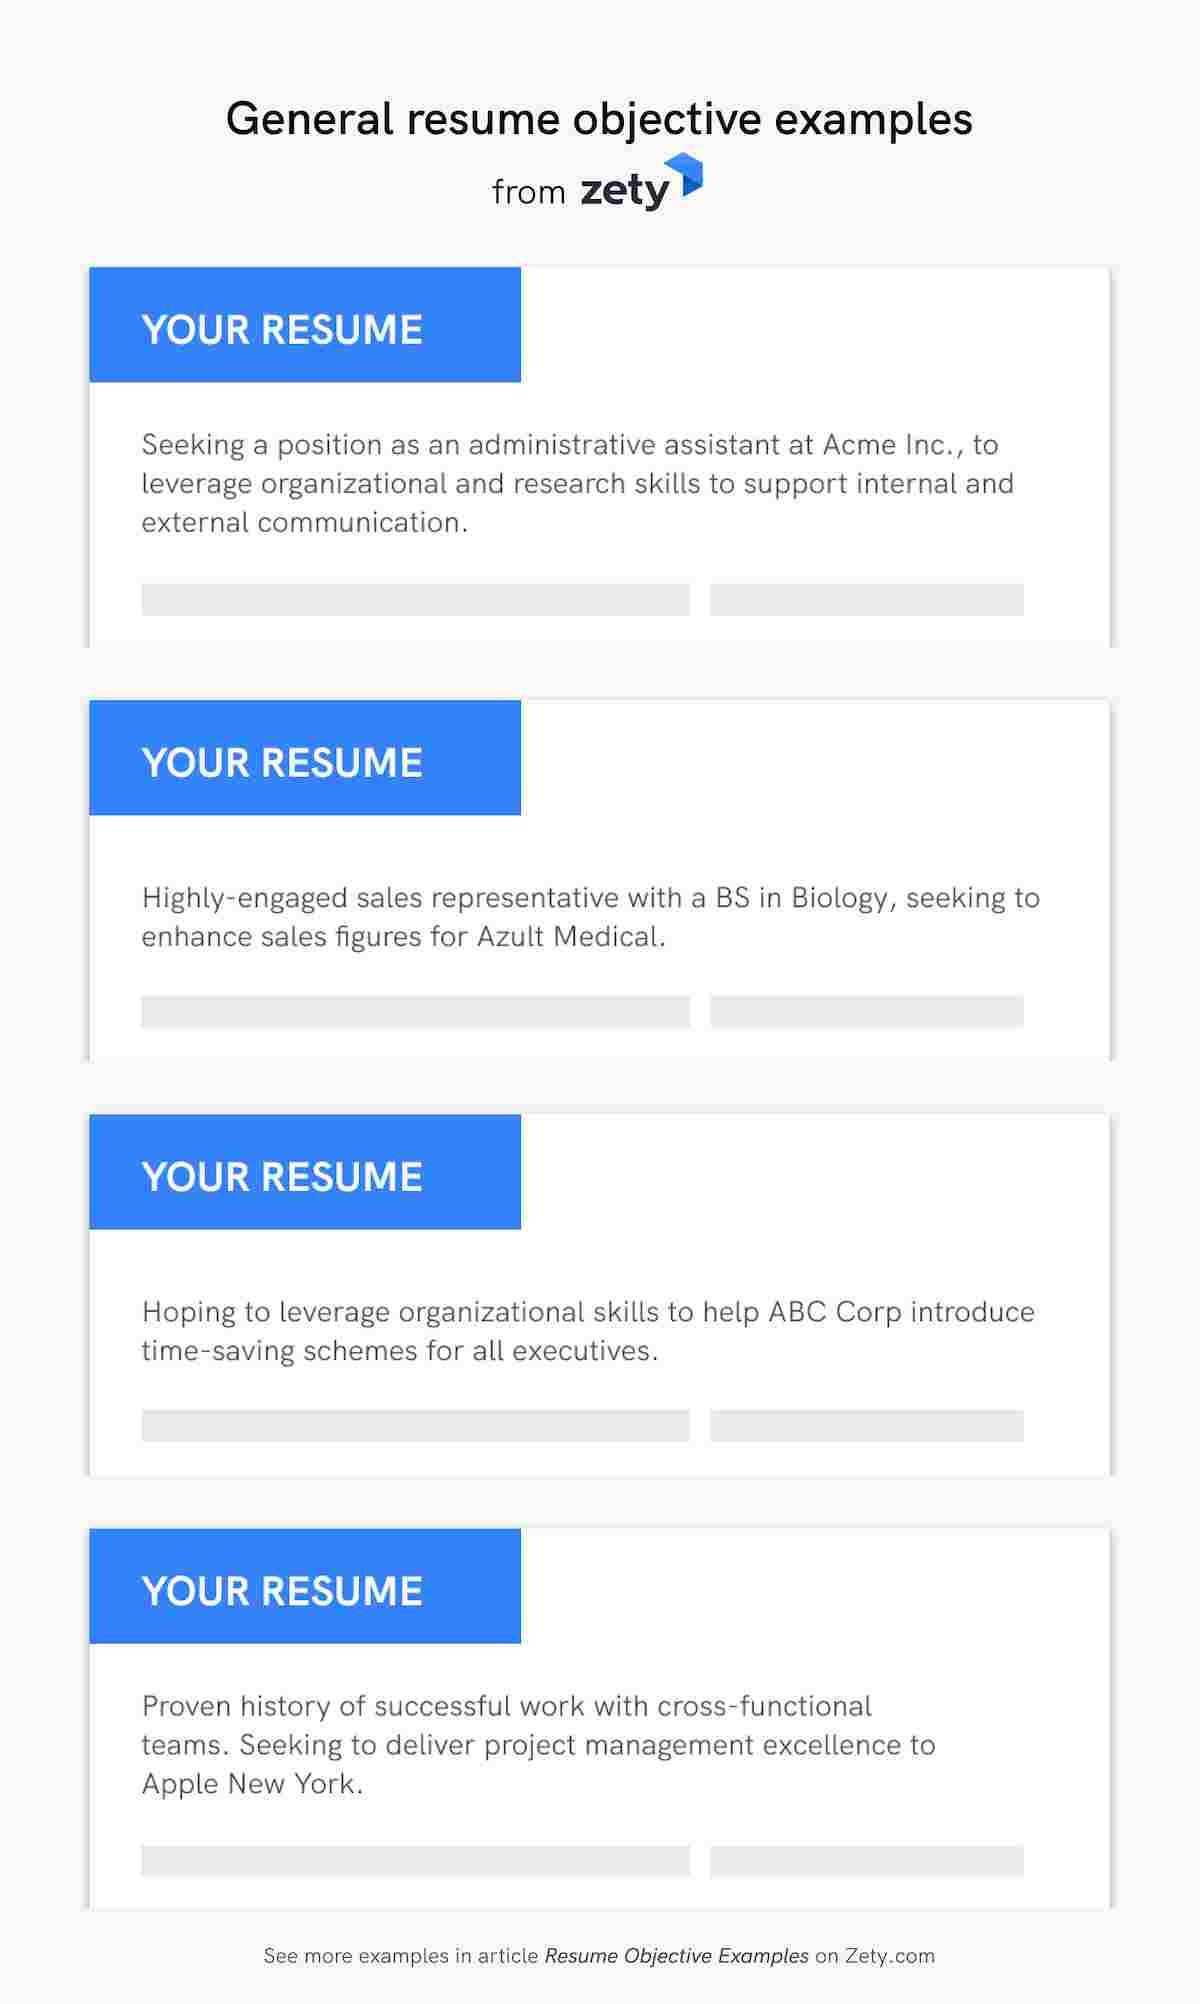 Resume Objective Sample for Experienced It Professionals 50lancarrezekiq Resume Objective Examples: Career Objectives for All Jobs